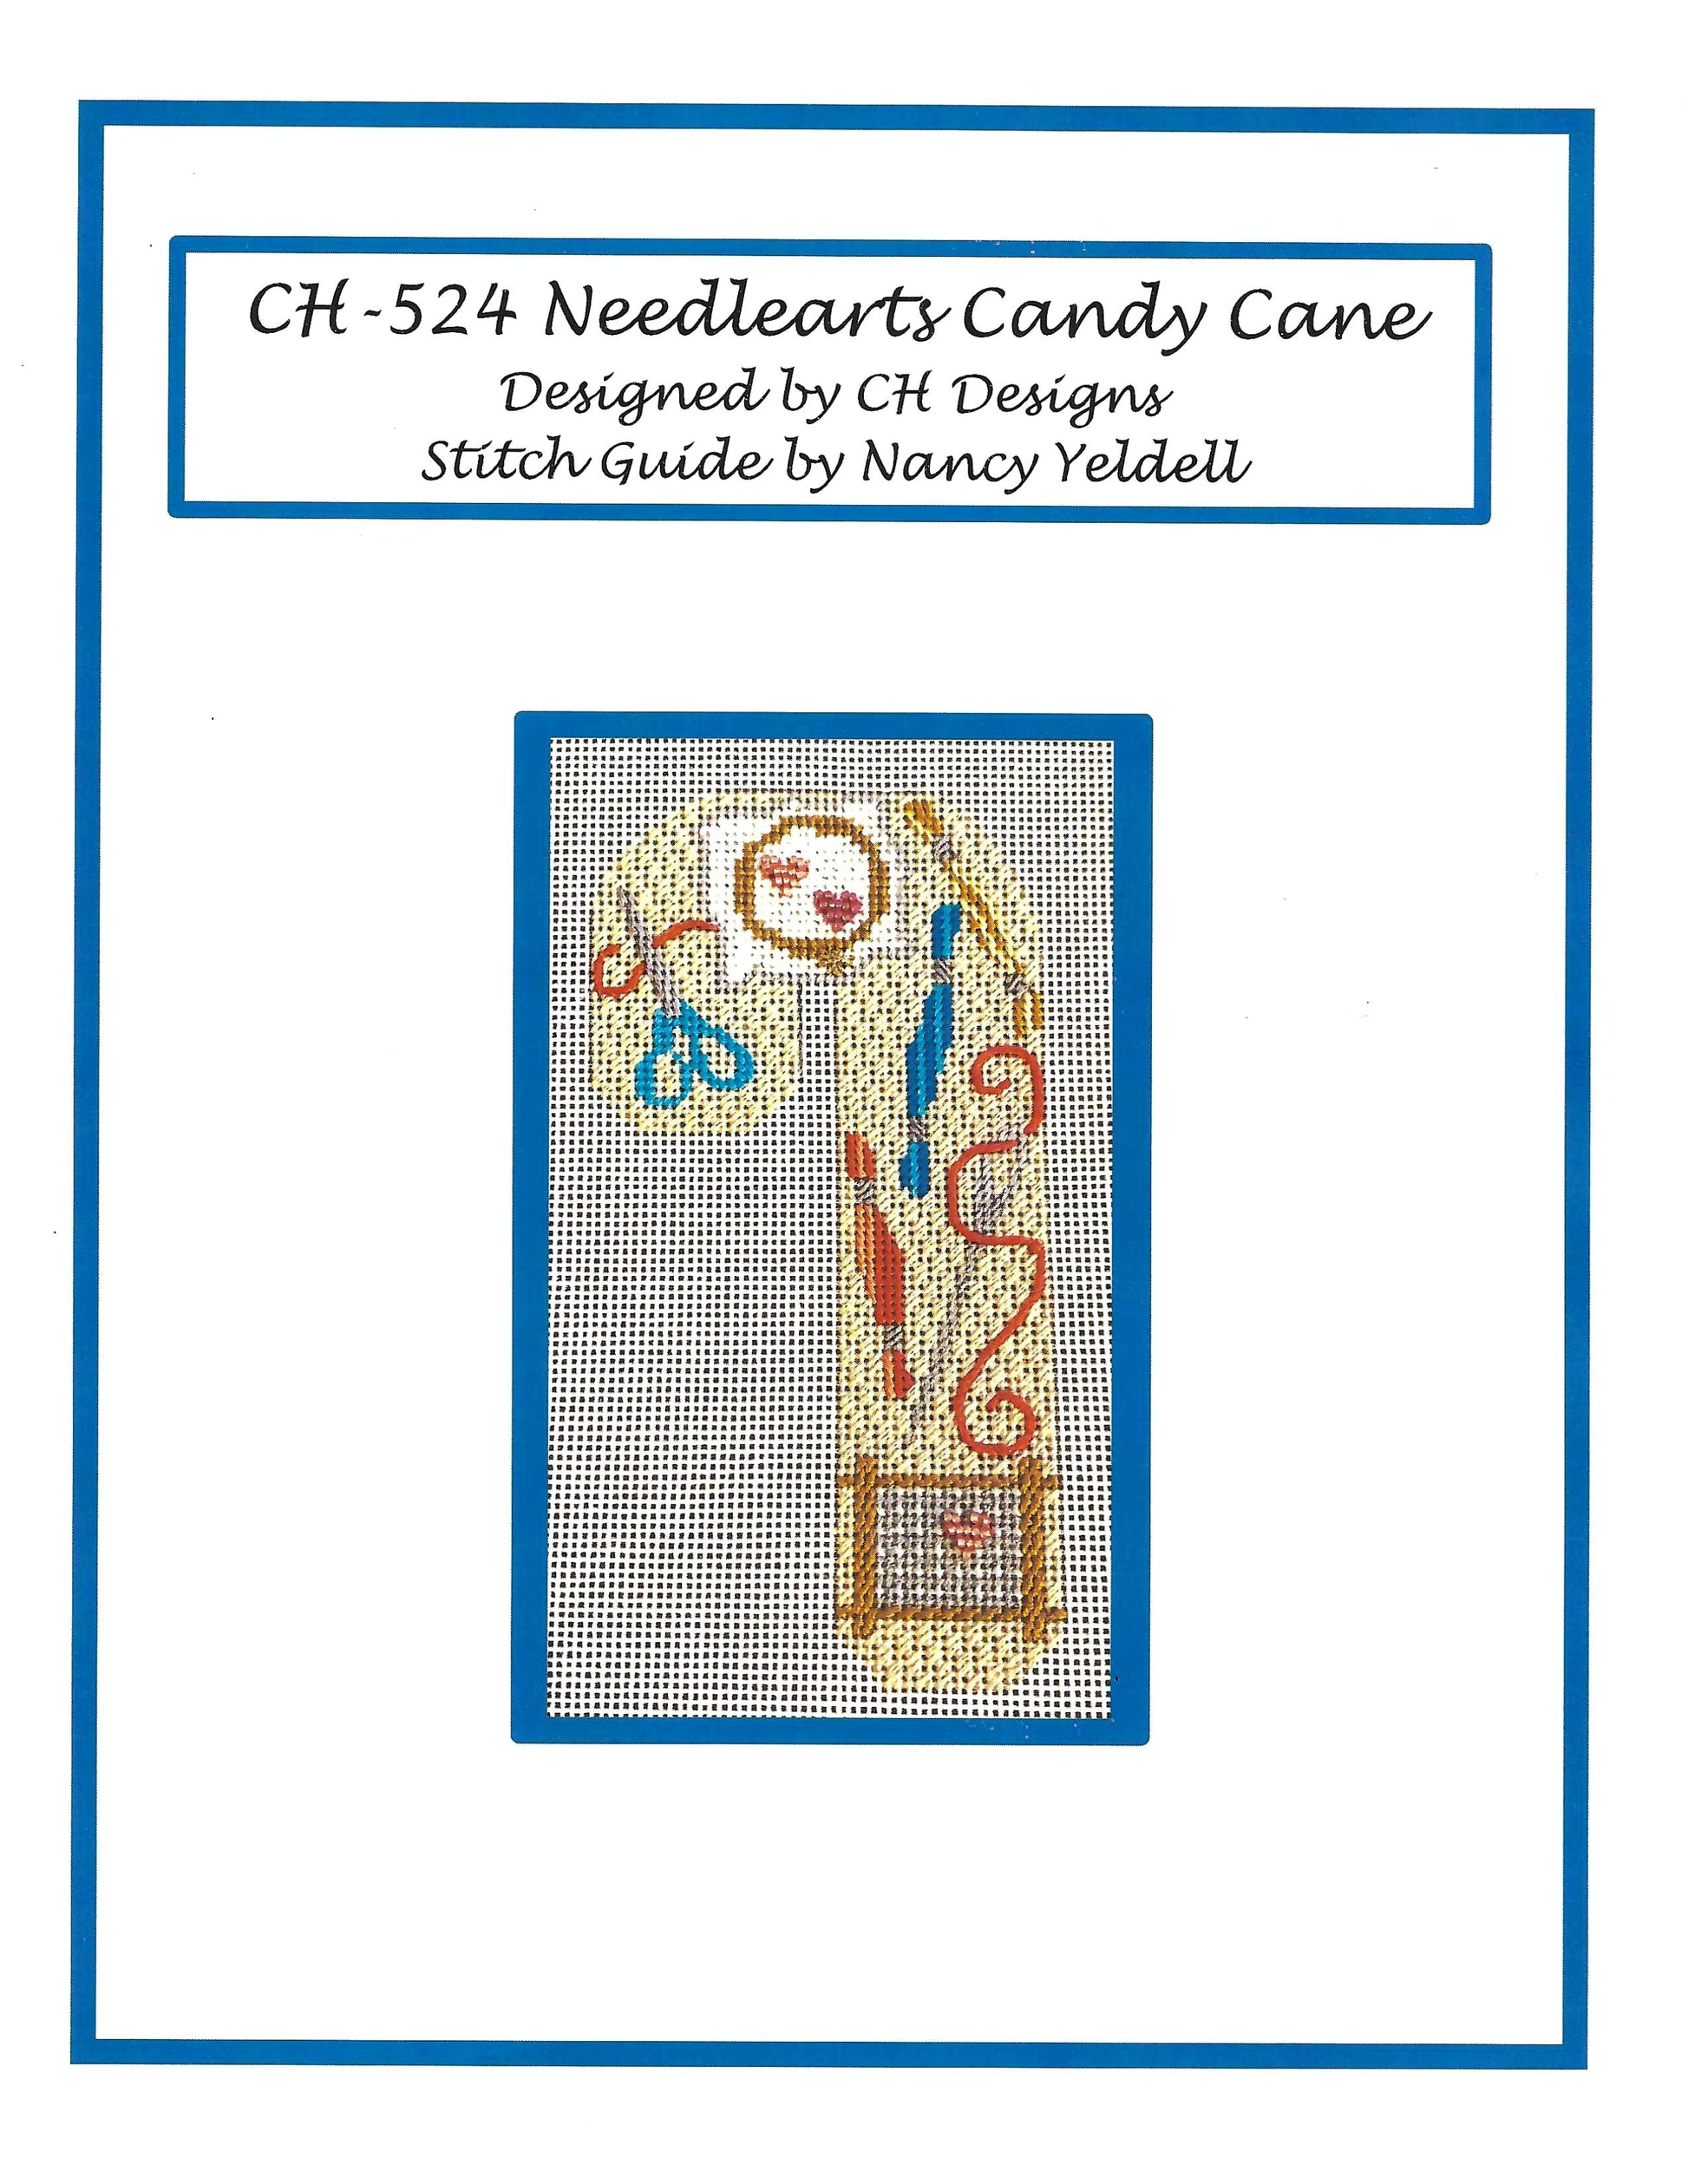 Candy Cane ~ Knitter's Needles, Tools & Yarn Medium Candy Cane handpainted  Needlepoint Canvas CH Design from Danji